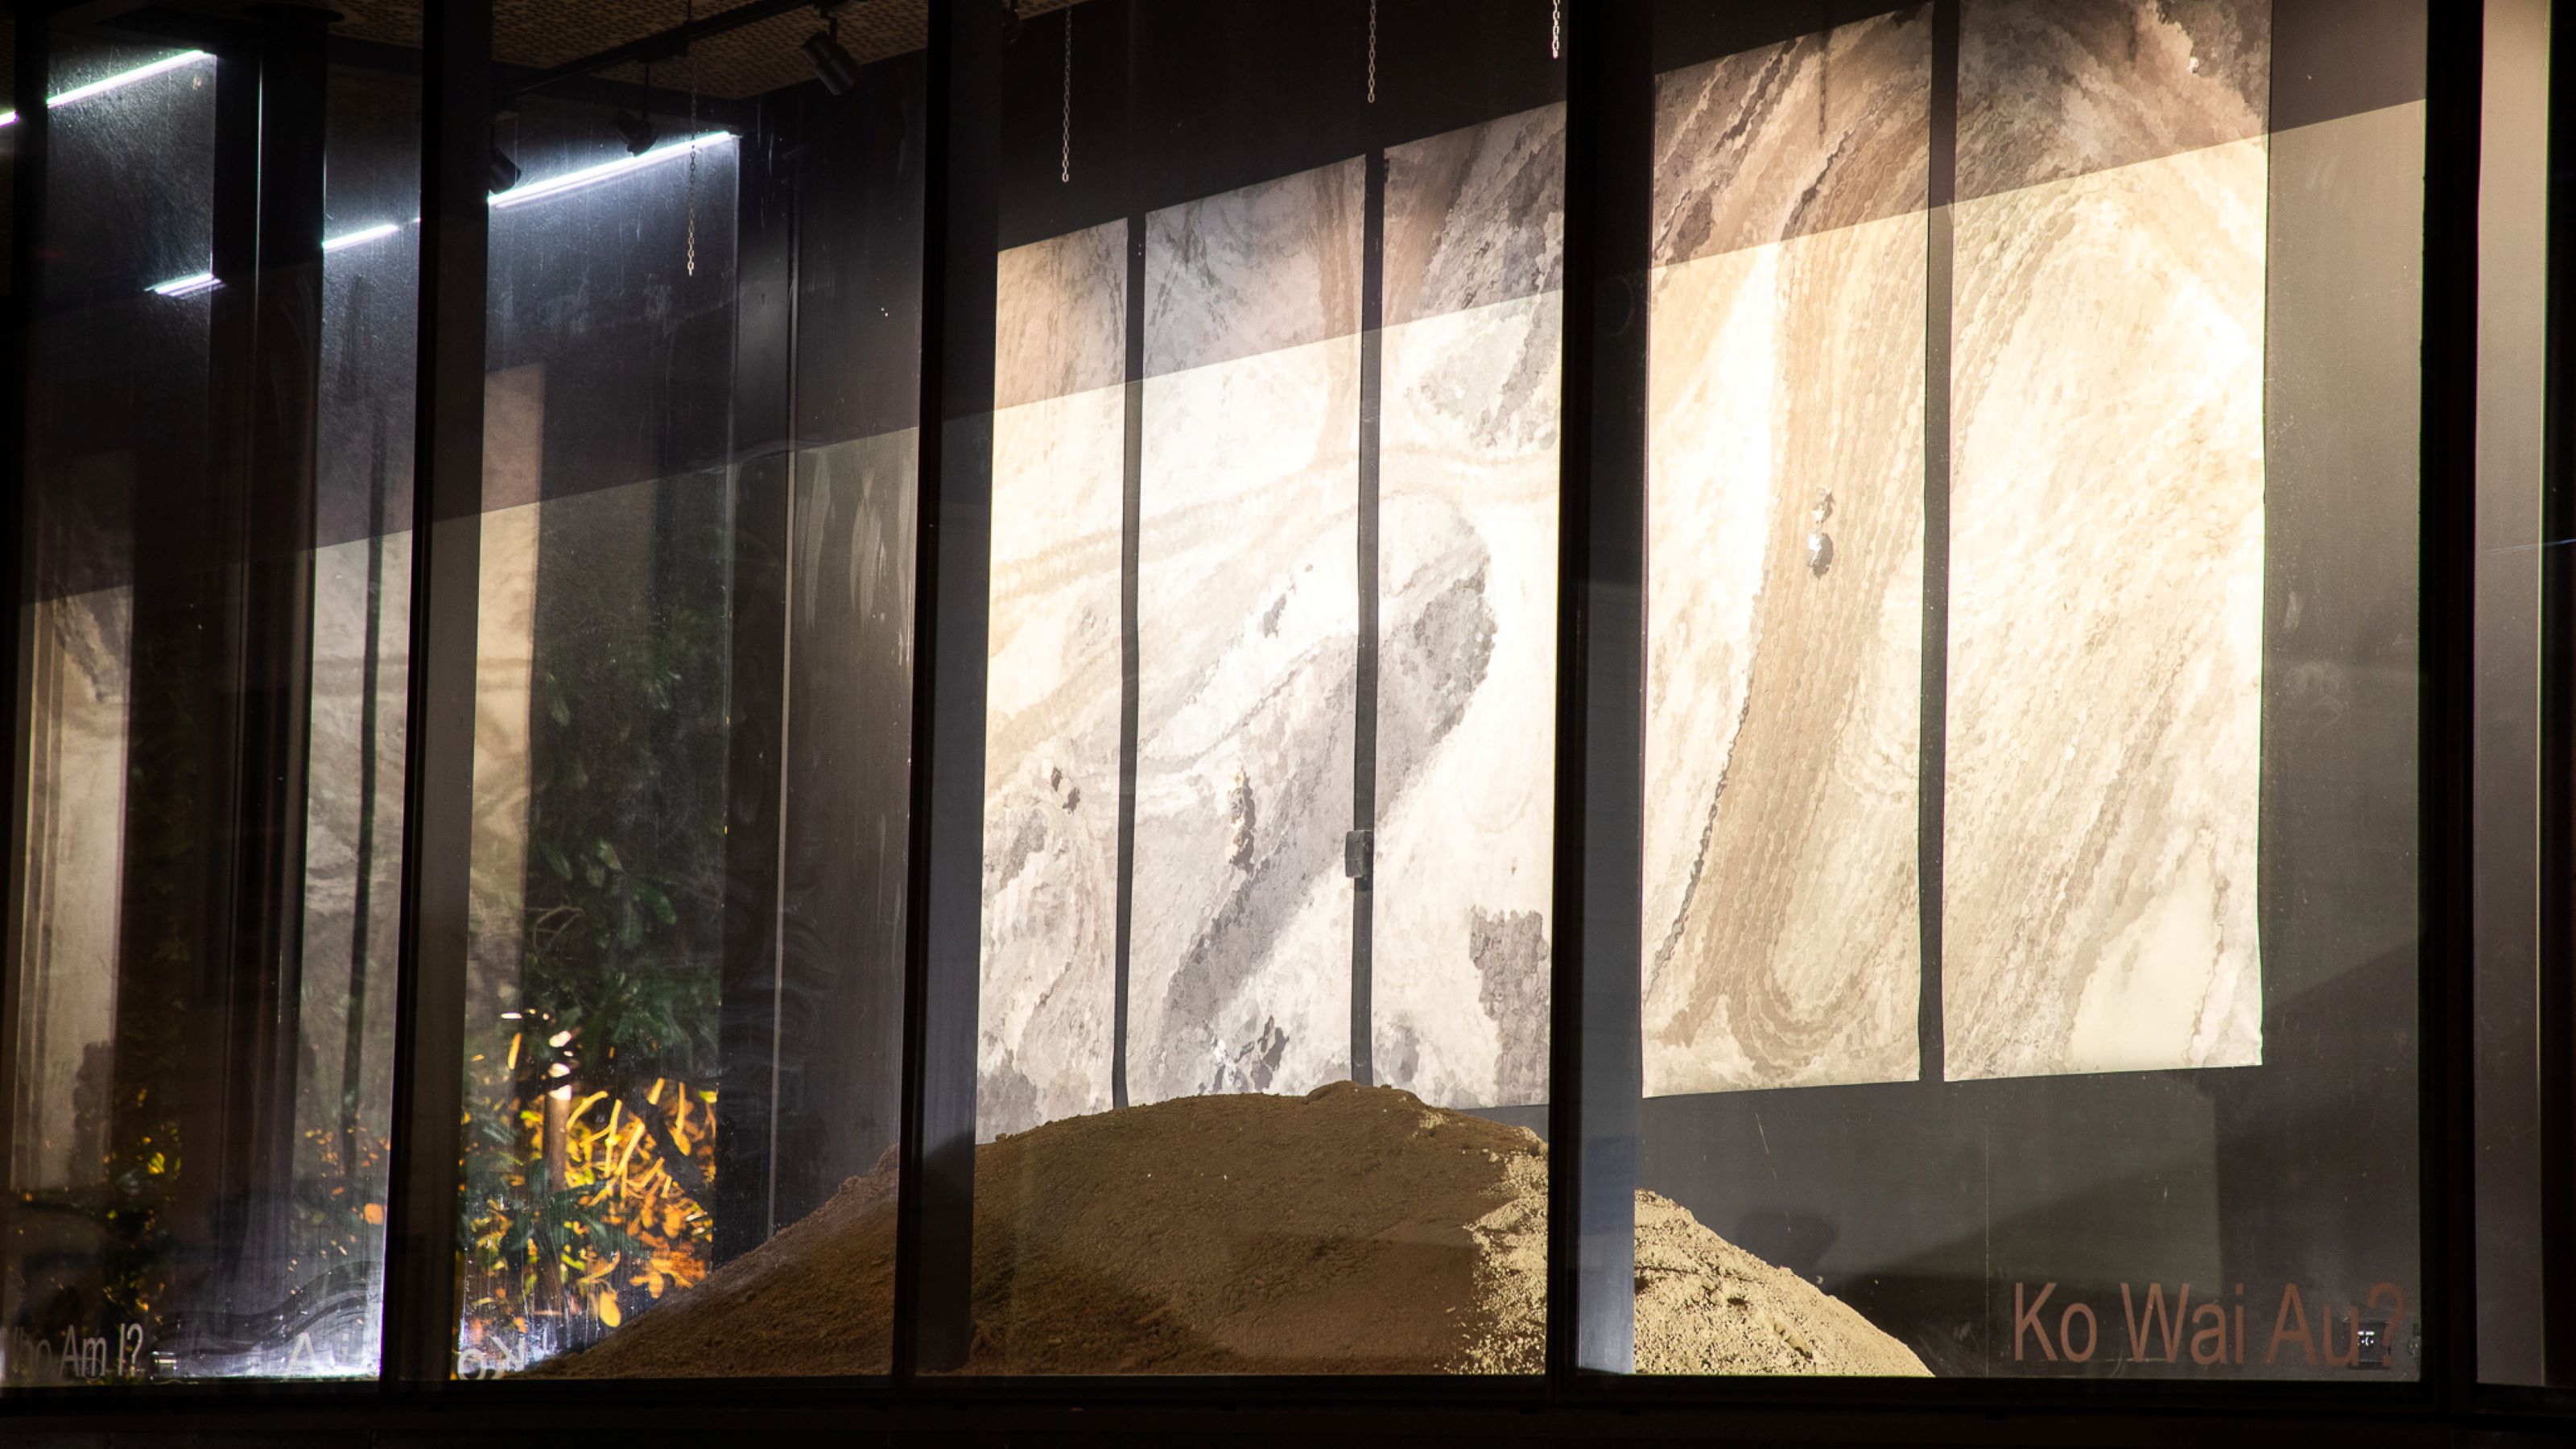 image of soil and artworks seen through glass window